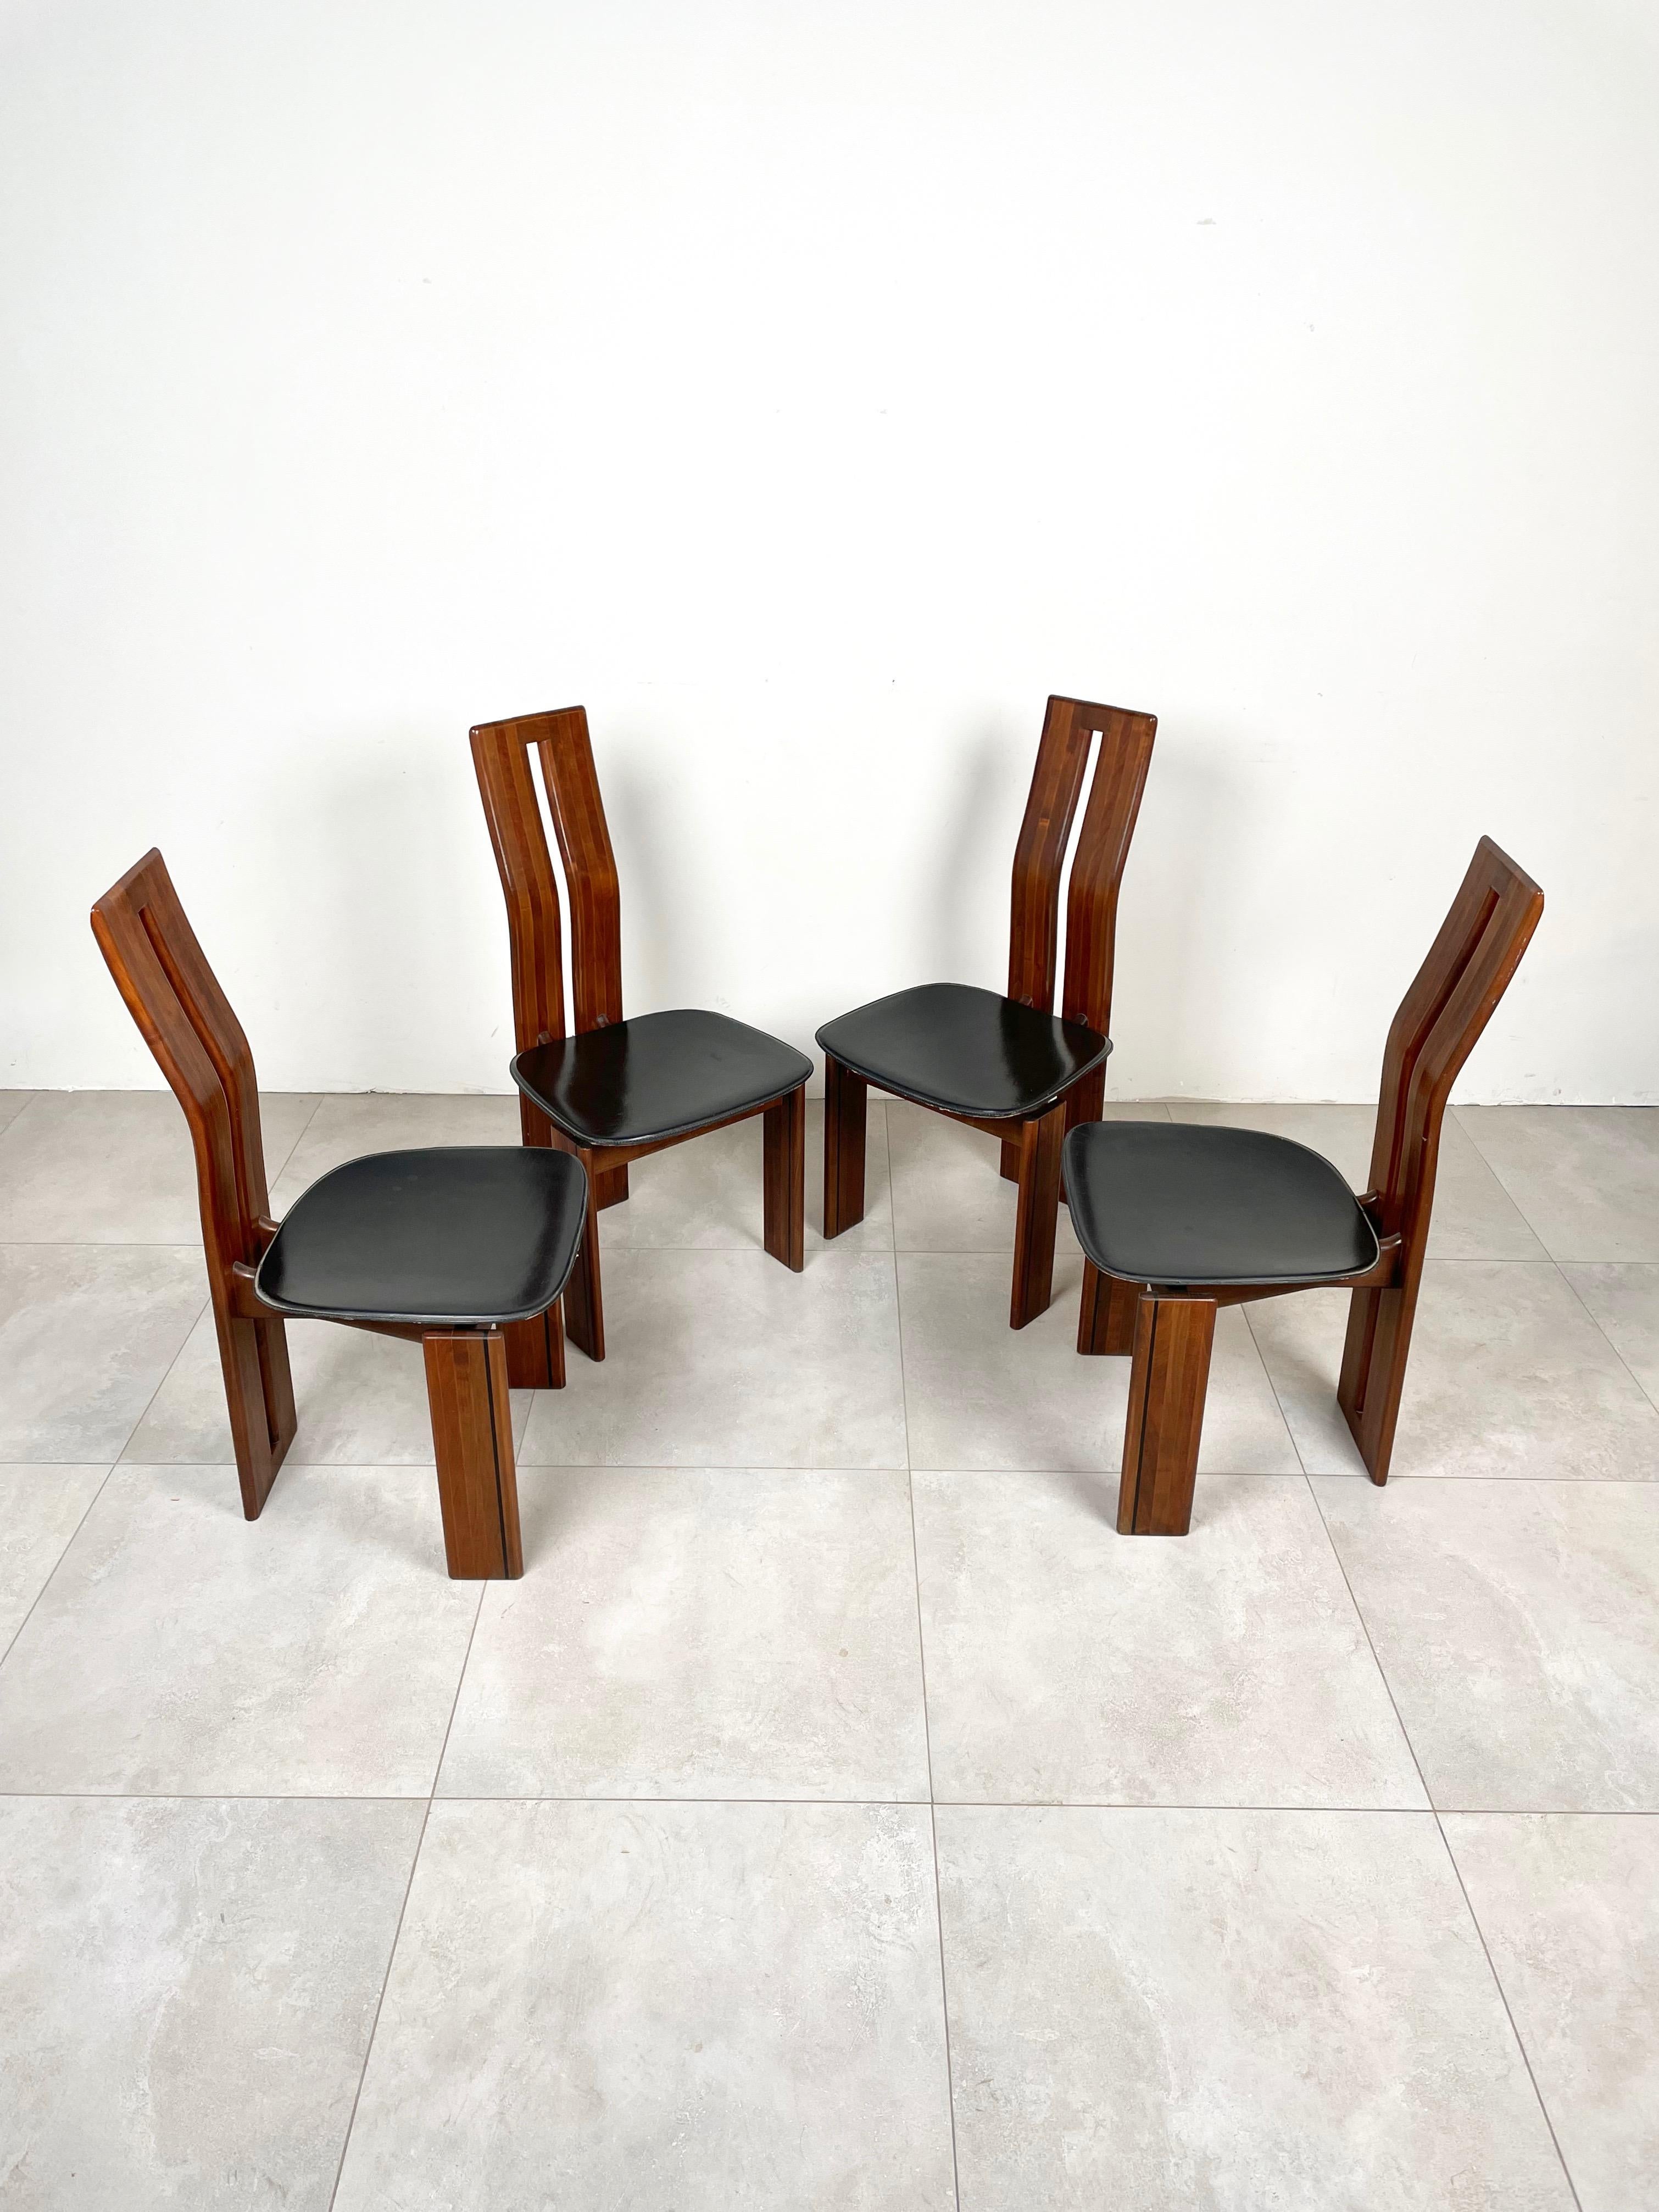 Set of Four Chairs Wood and Leather Mario Marenco for Mobil Girgi, Italy 1970s For Sale 1